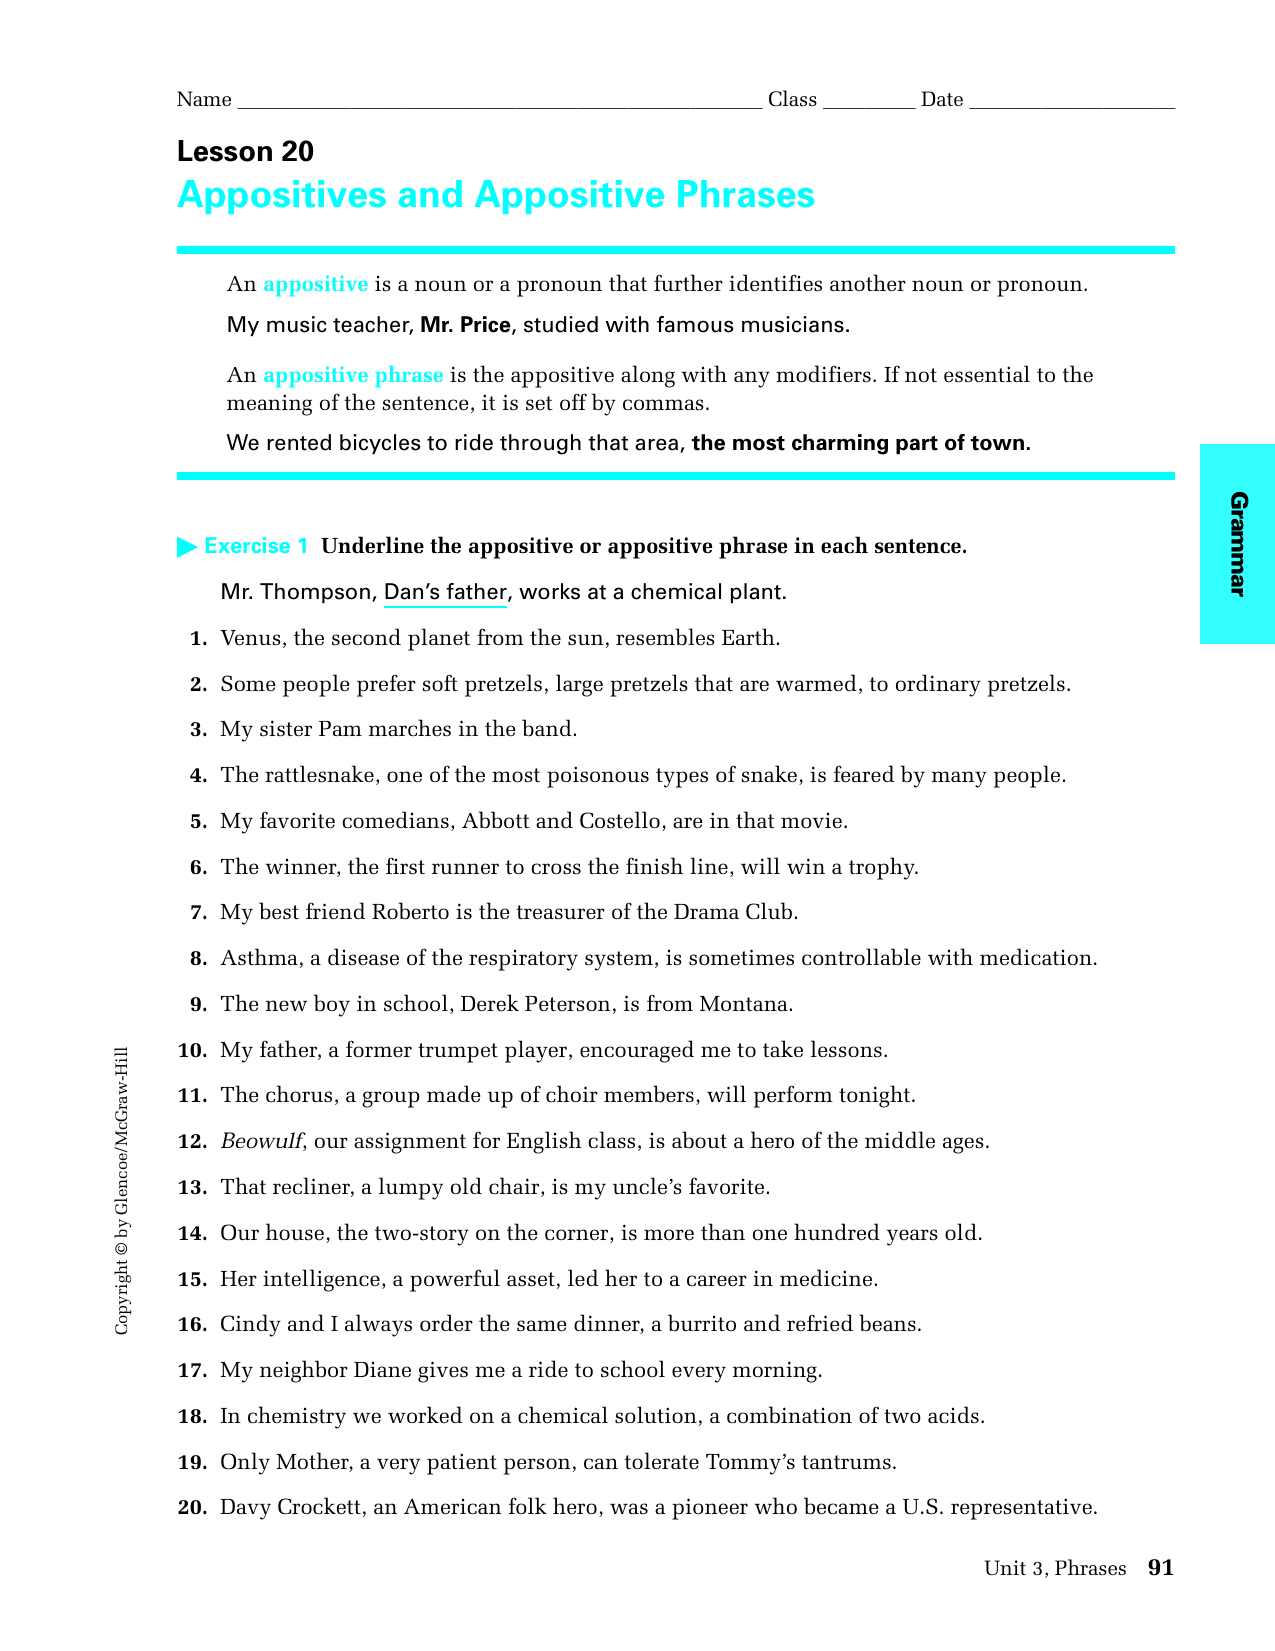 appositives-and-appositive-phrases-worksheet-answers-promotiontablecovers